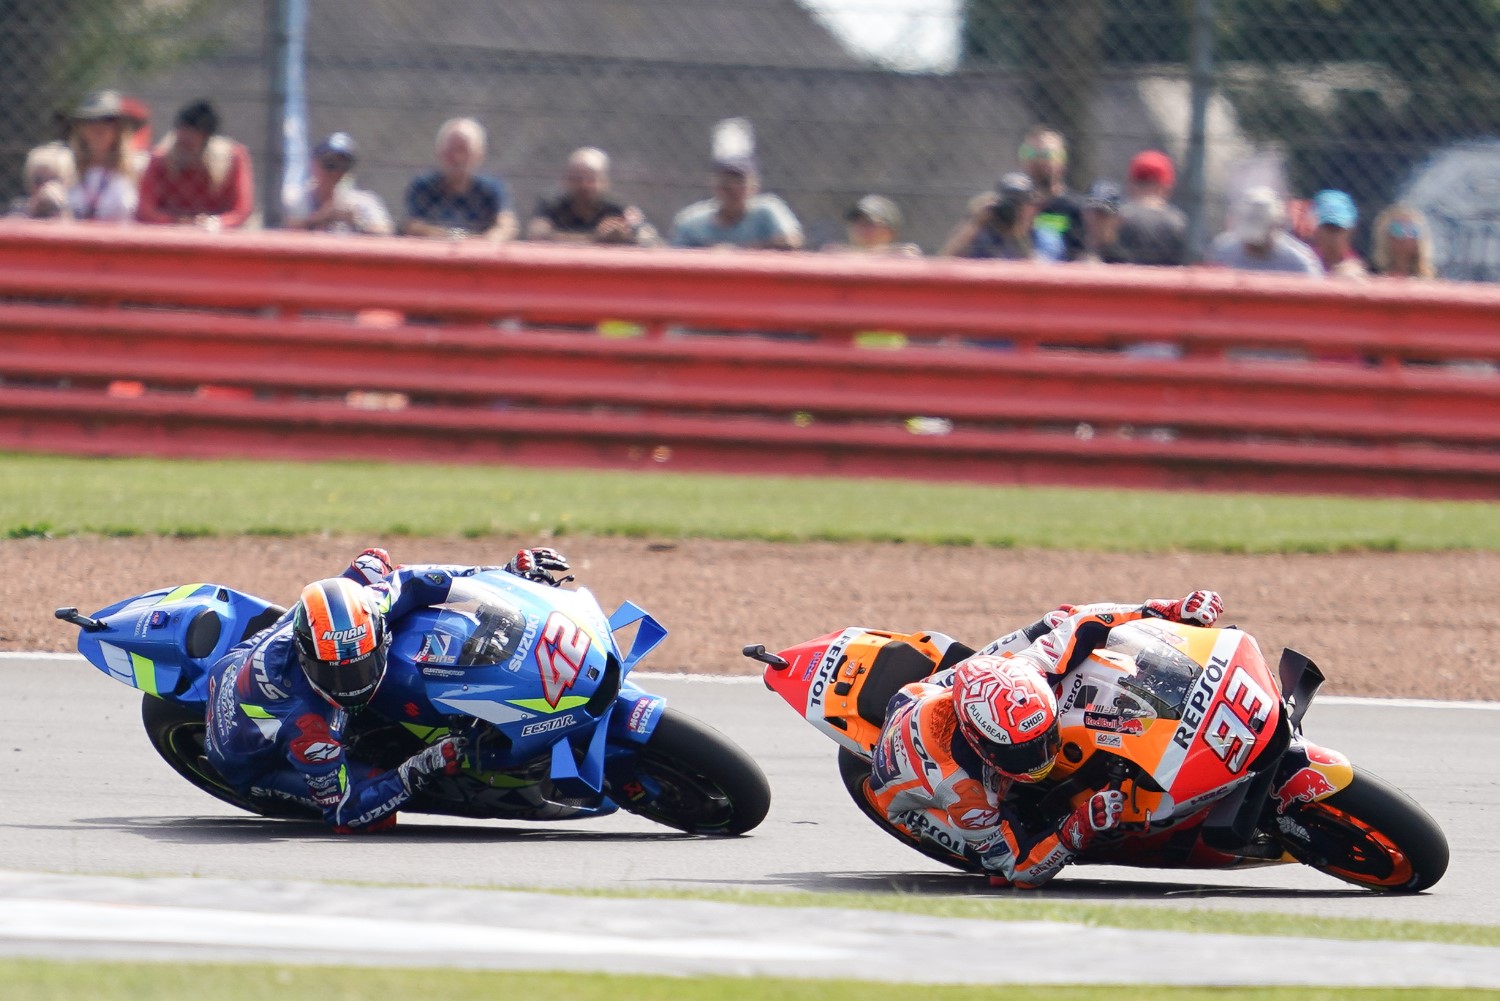 It was a race long battle between Marquez and Rins